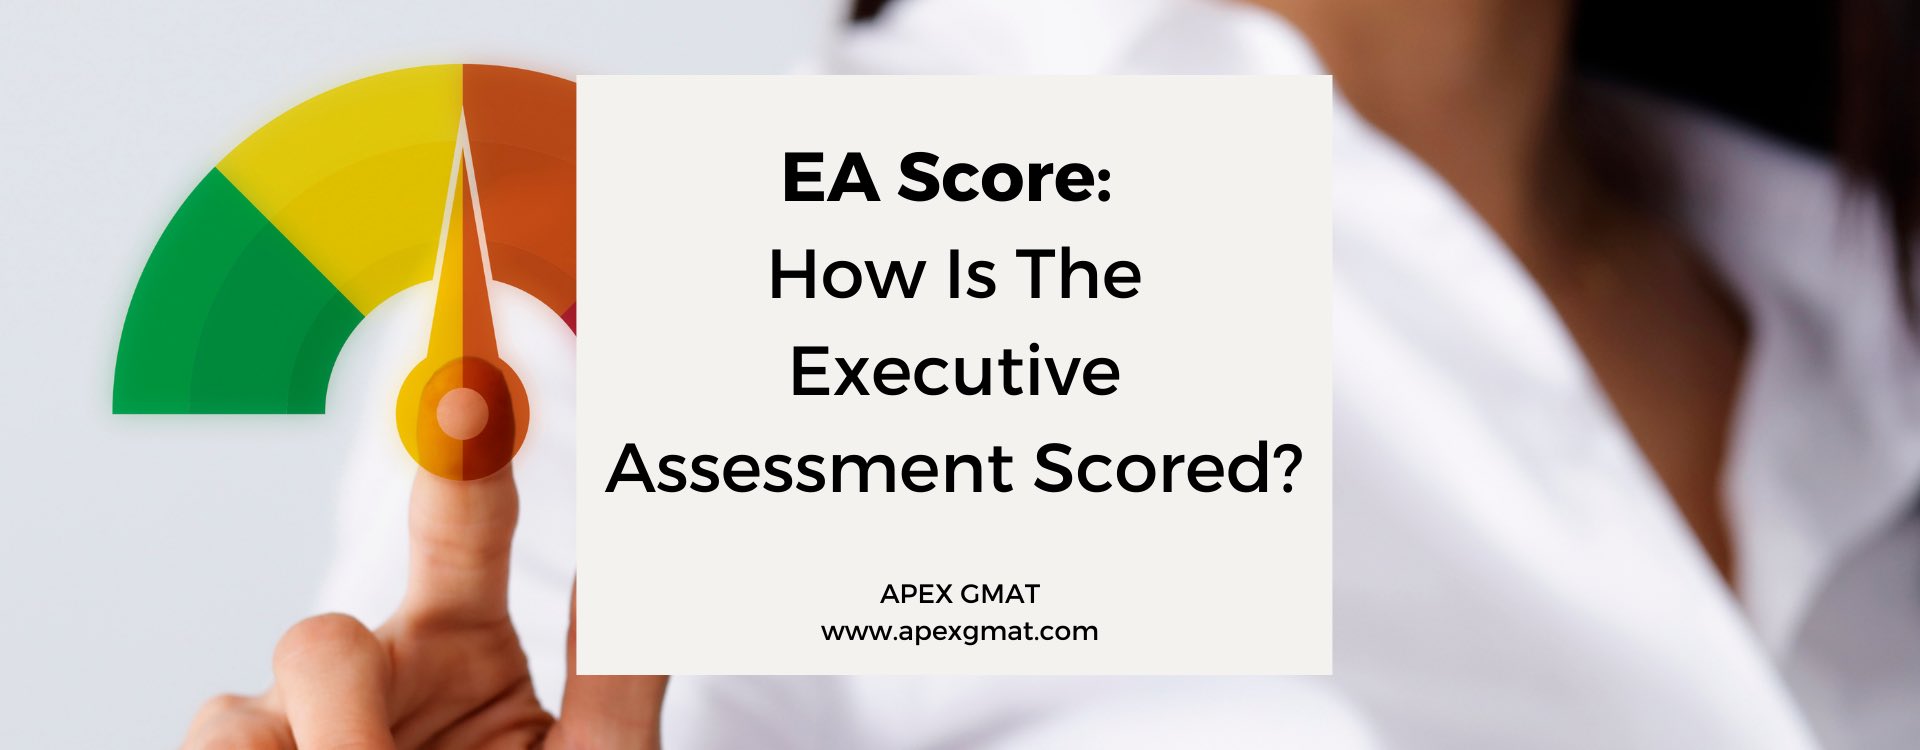 EA Score: How Is The Executive Assessment Scored?